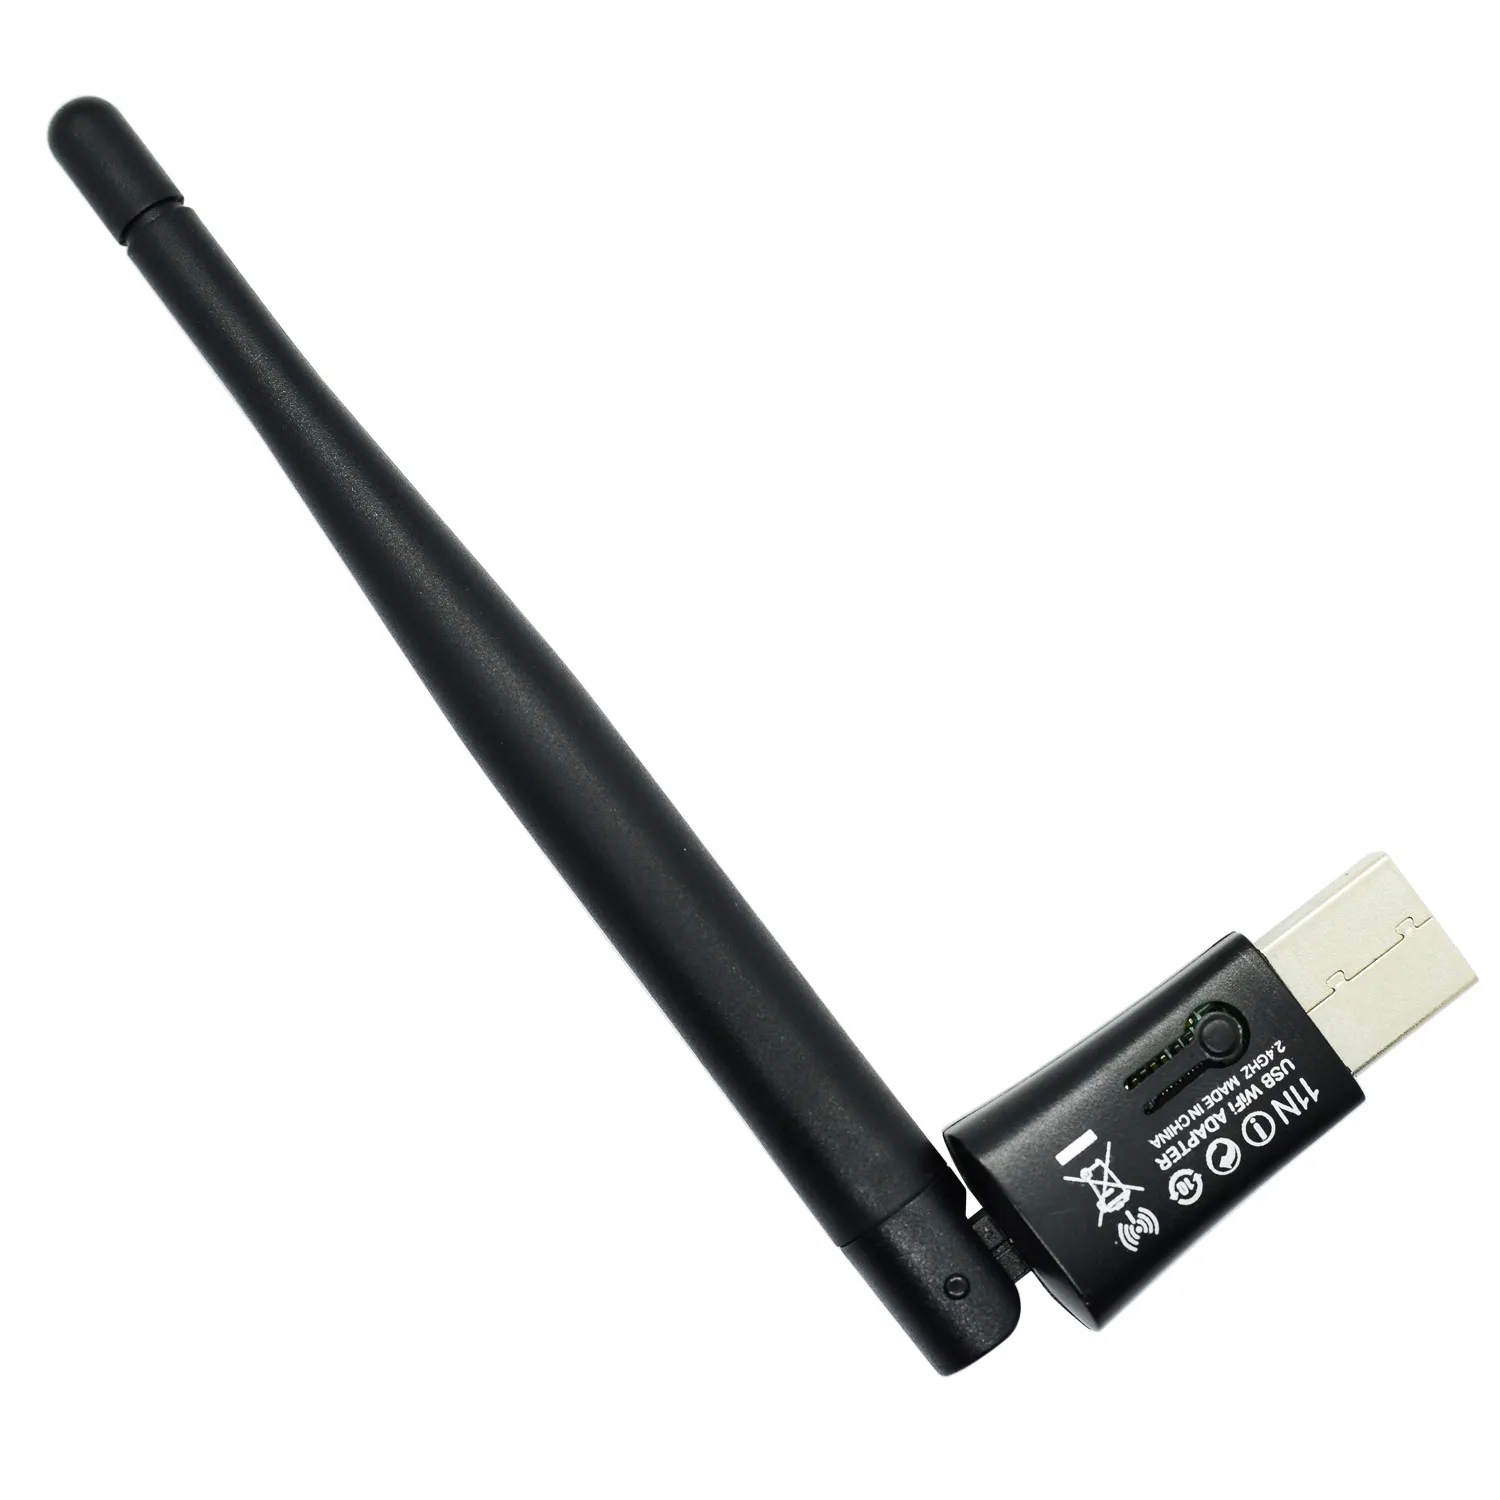 150Mbps MT7601 Wireless Network Adapter Card Mini USB 2.0 WiFi Antenna Receiver Dongle 802.11 b/g/n MAG250 MAG254 MAG322